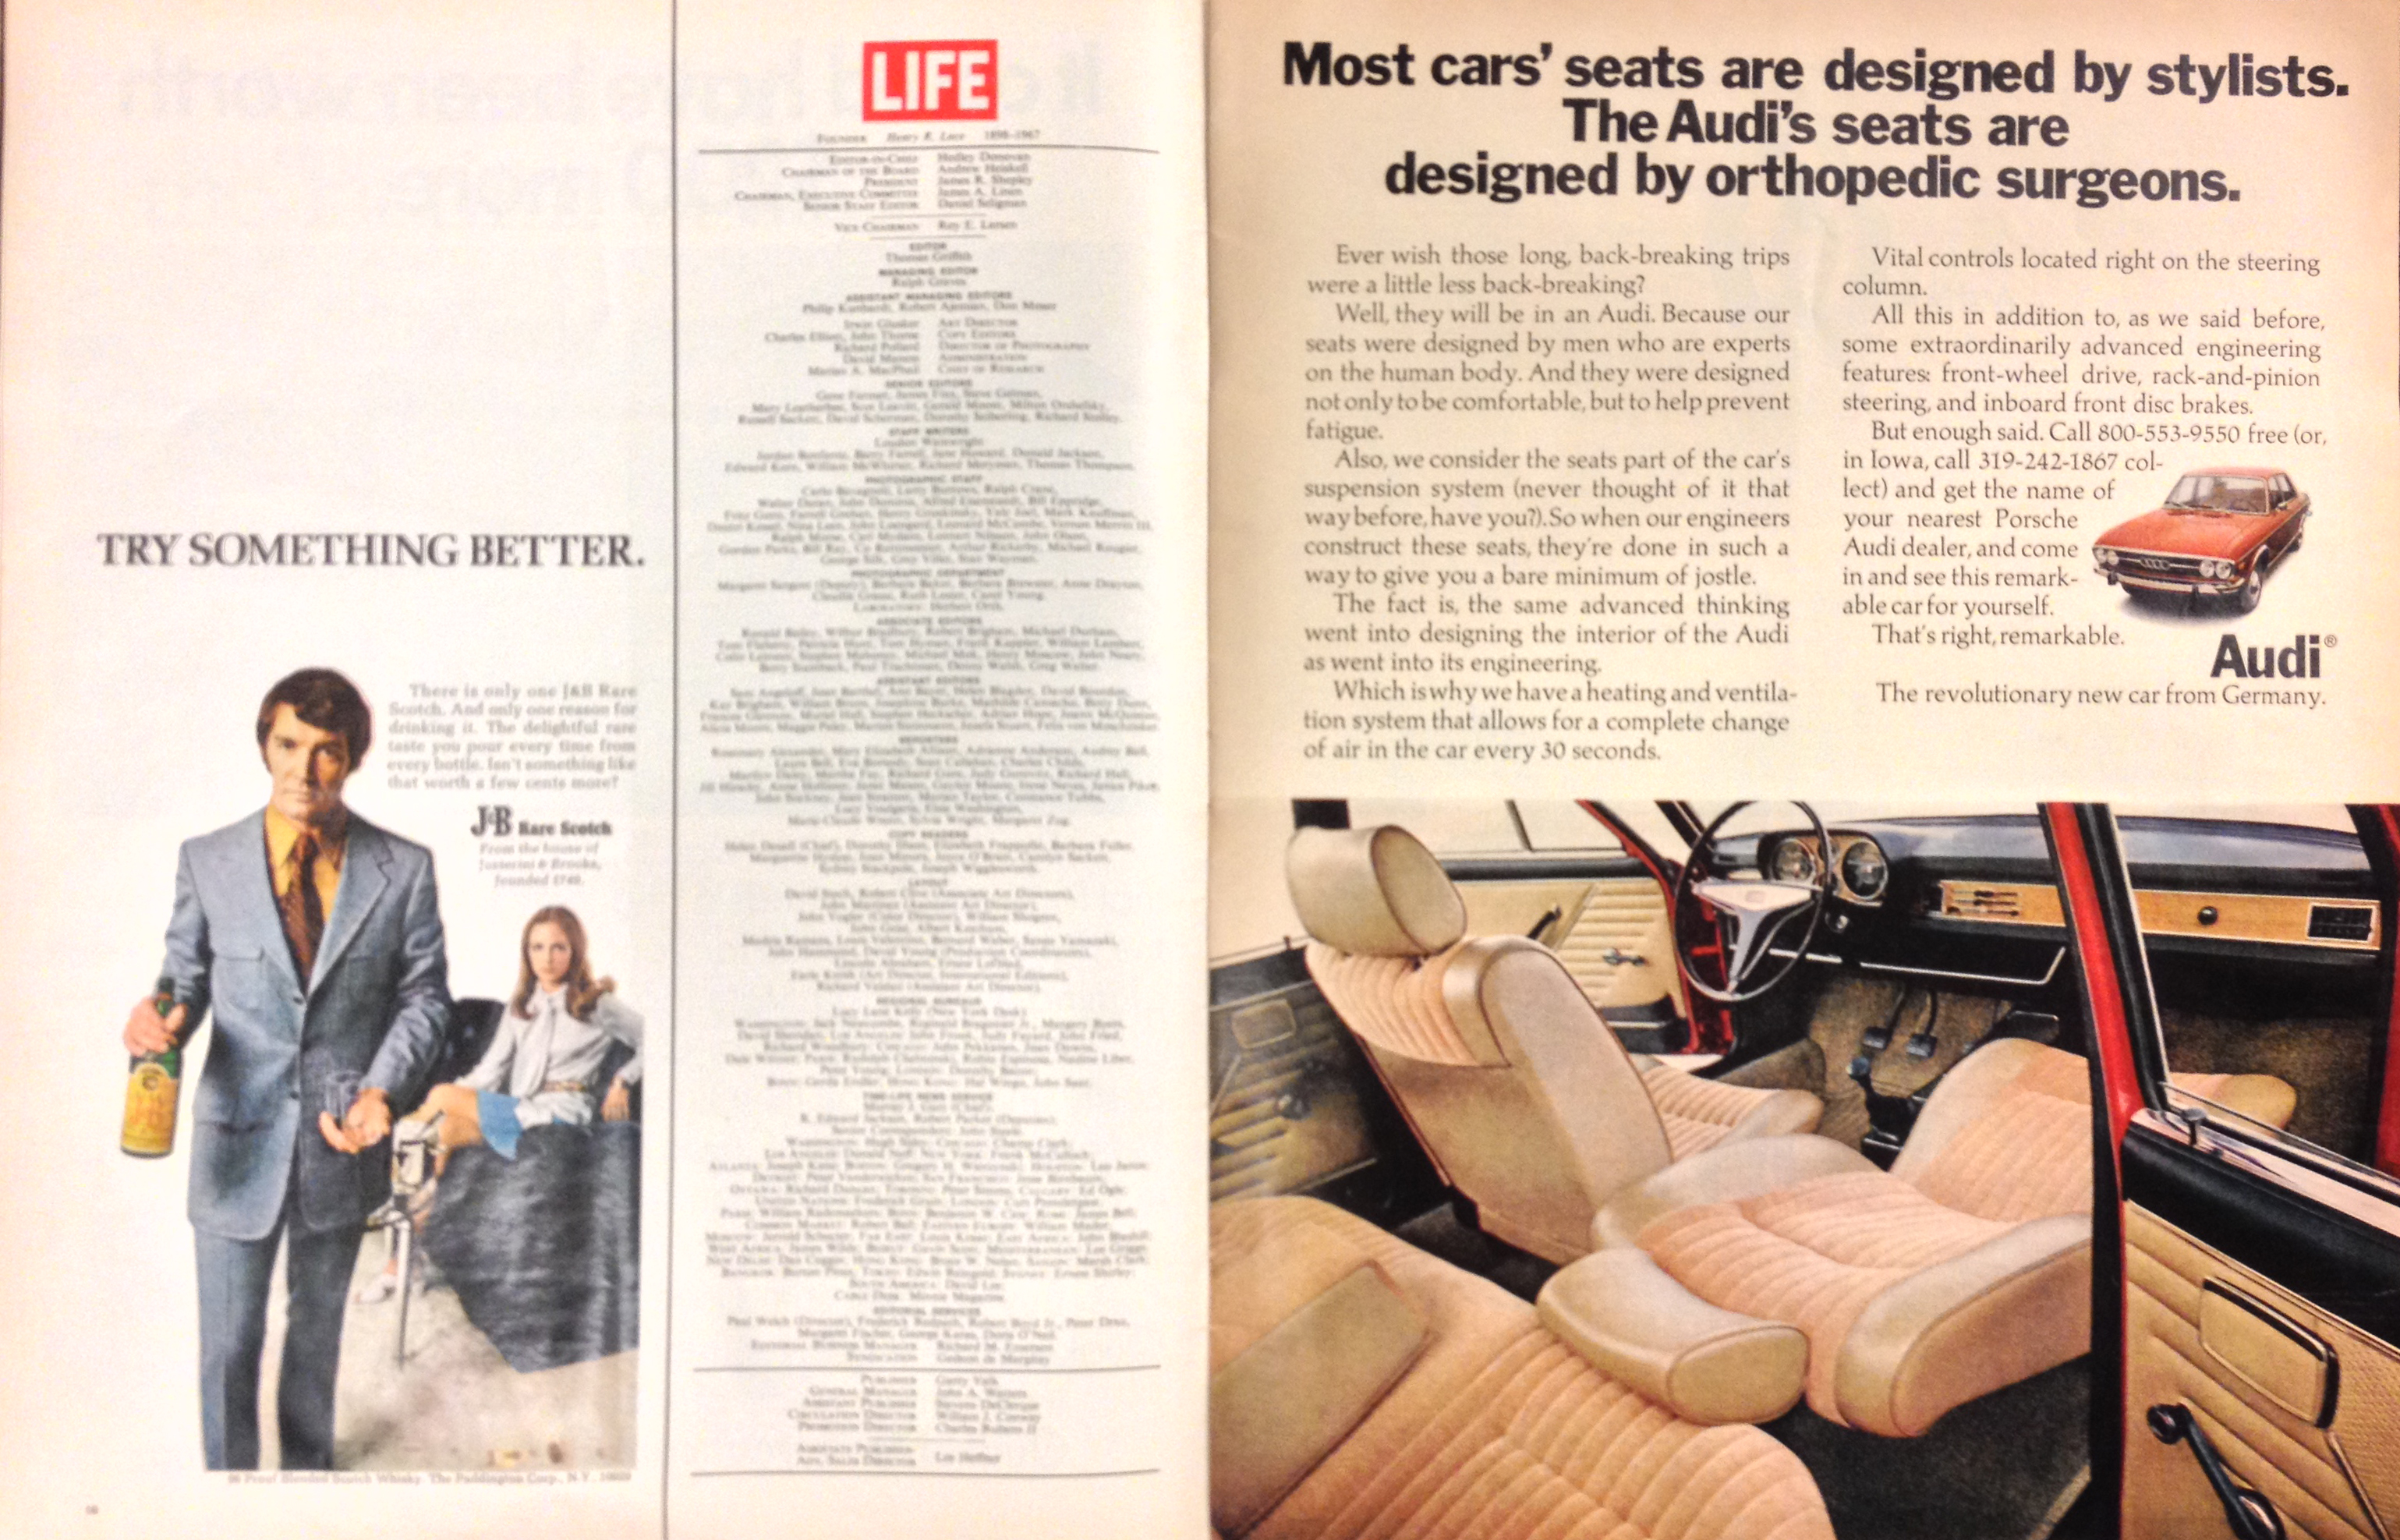 Audi Advertising - 29 May 1970 LIFE Magazine pages 16 and 17 - Audi's orthopedic seats